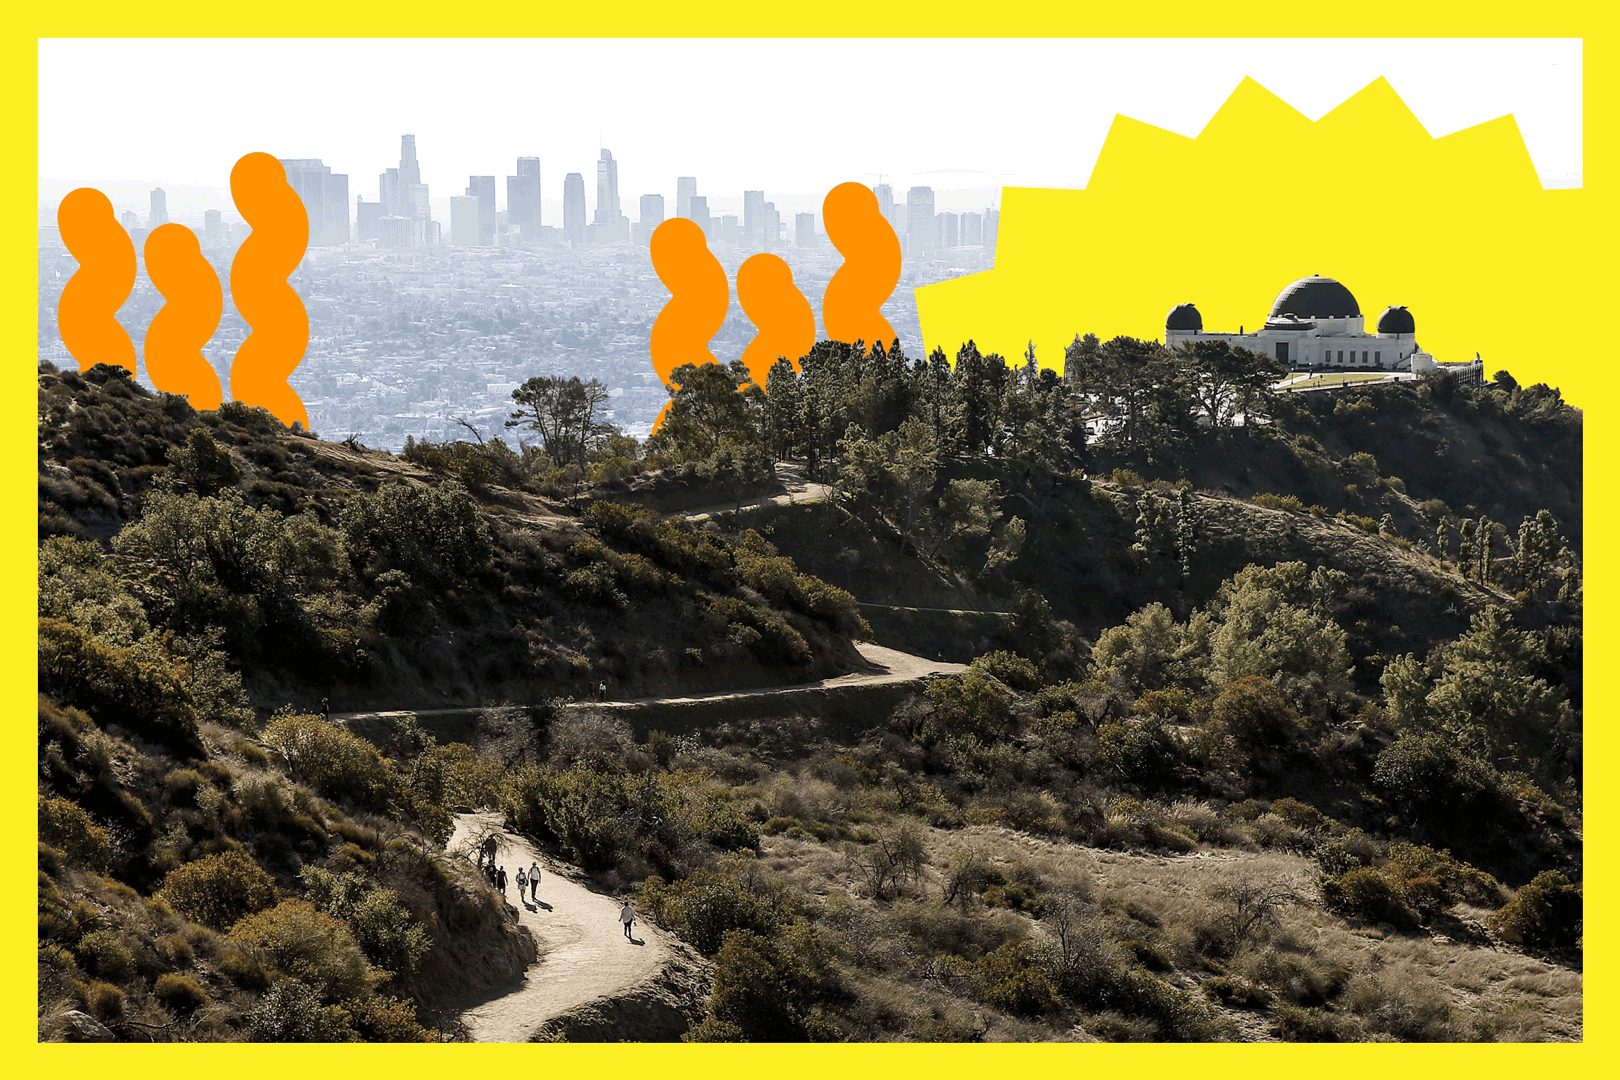 Several trails feed into the Mt Hollywood Trail leading to the peak of Mount Hollywood